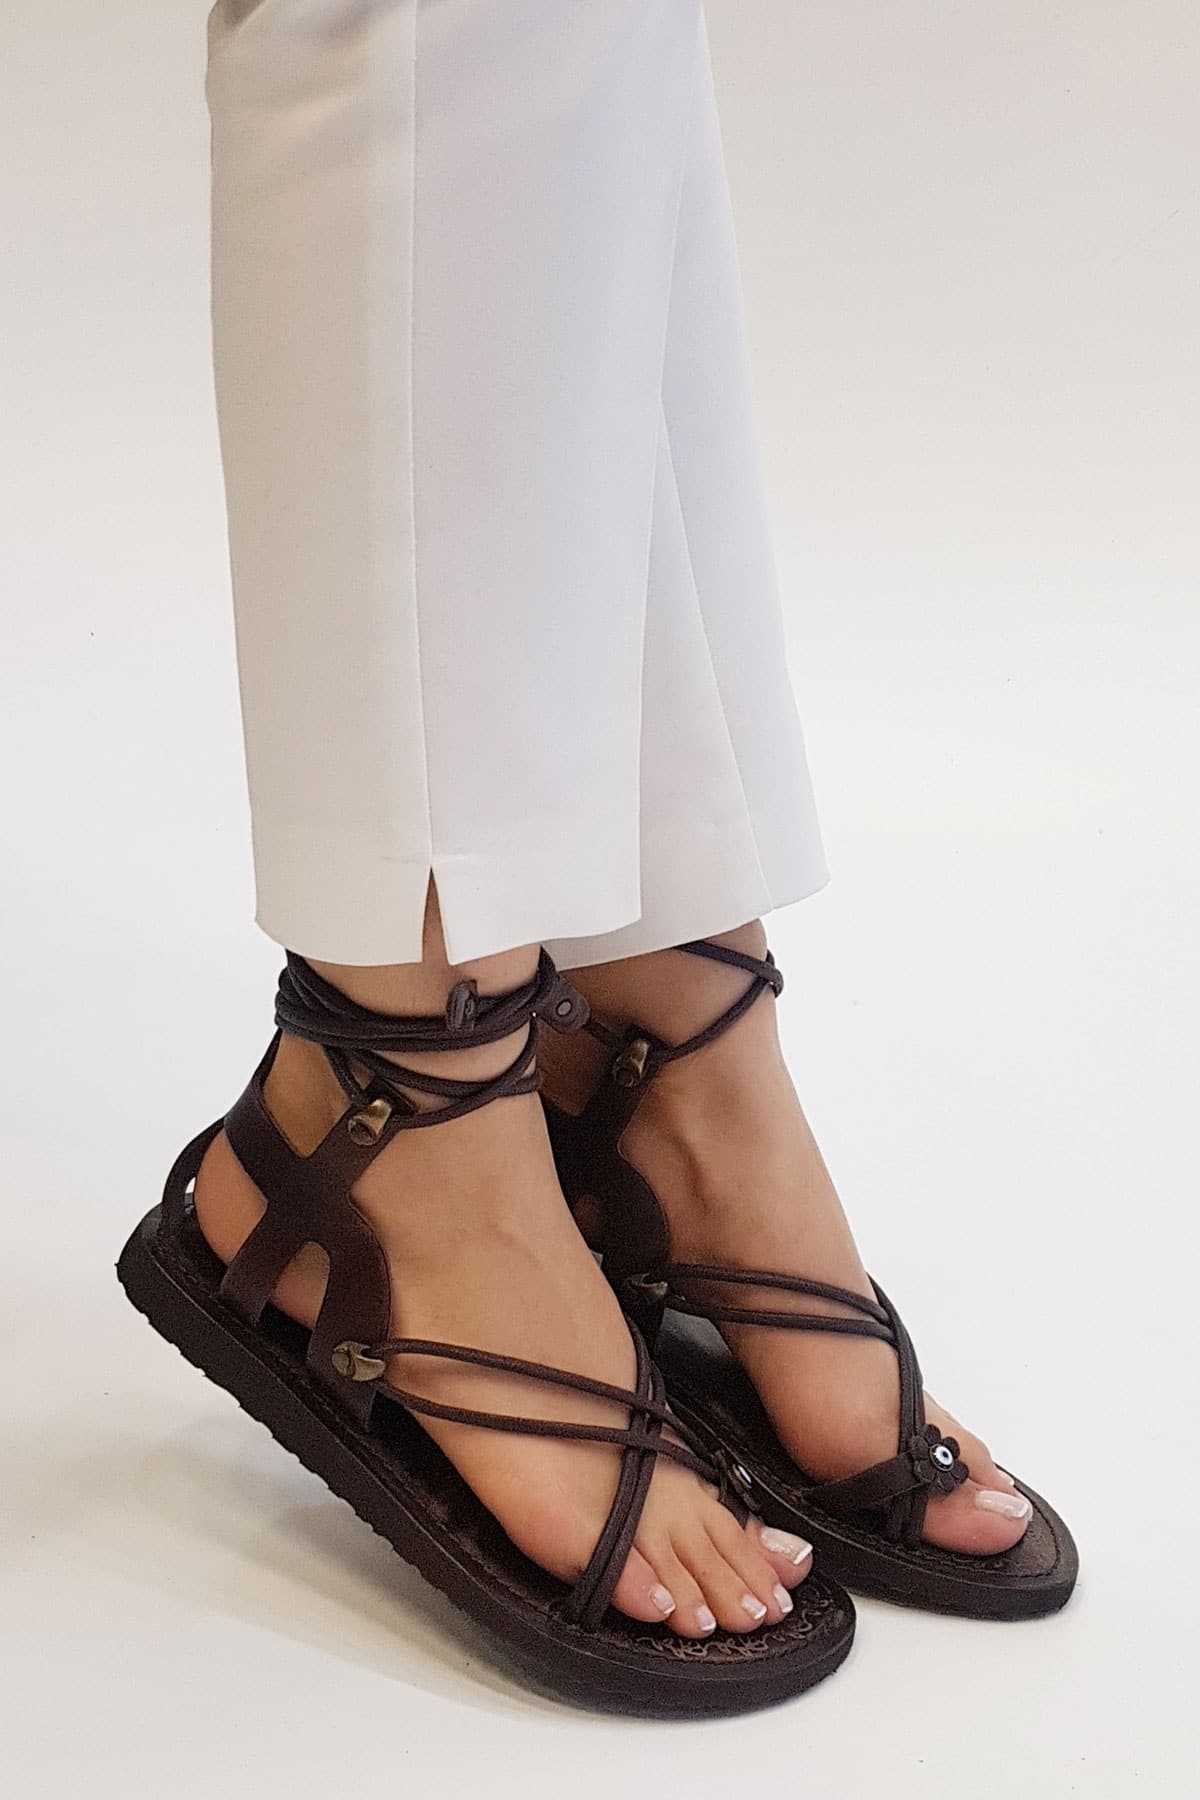 Ladies Strappy Cute Leather Sandals